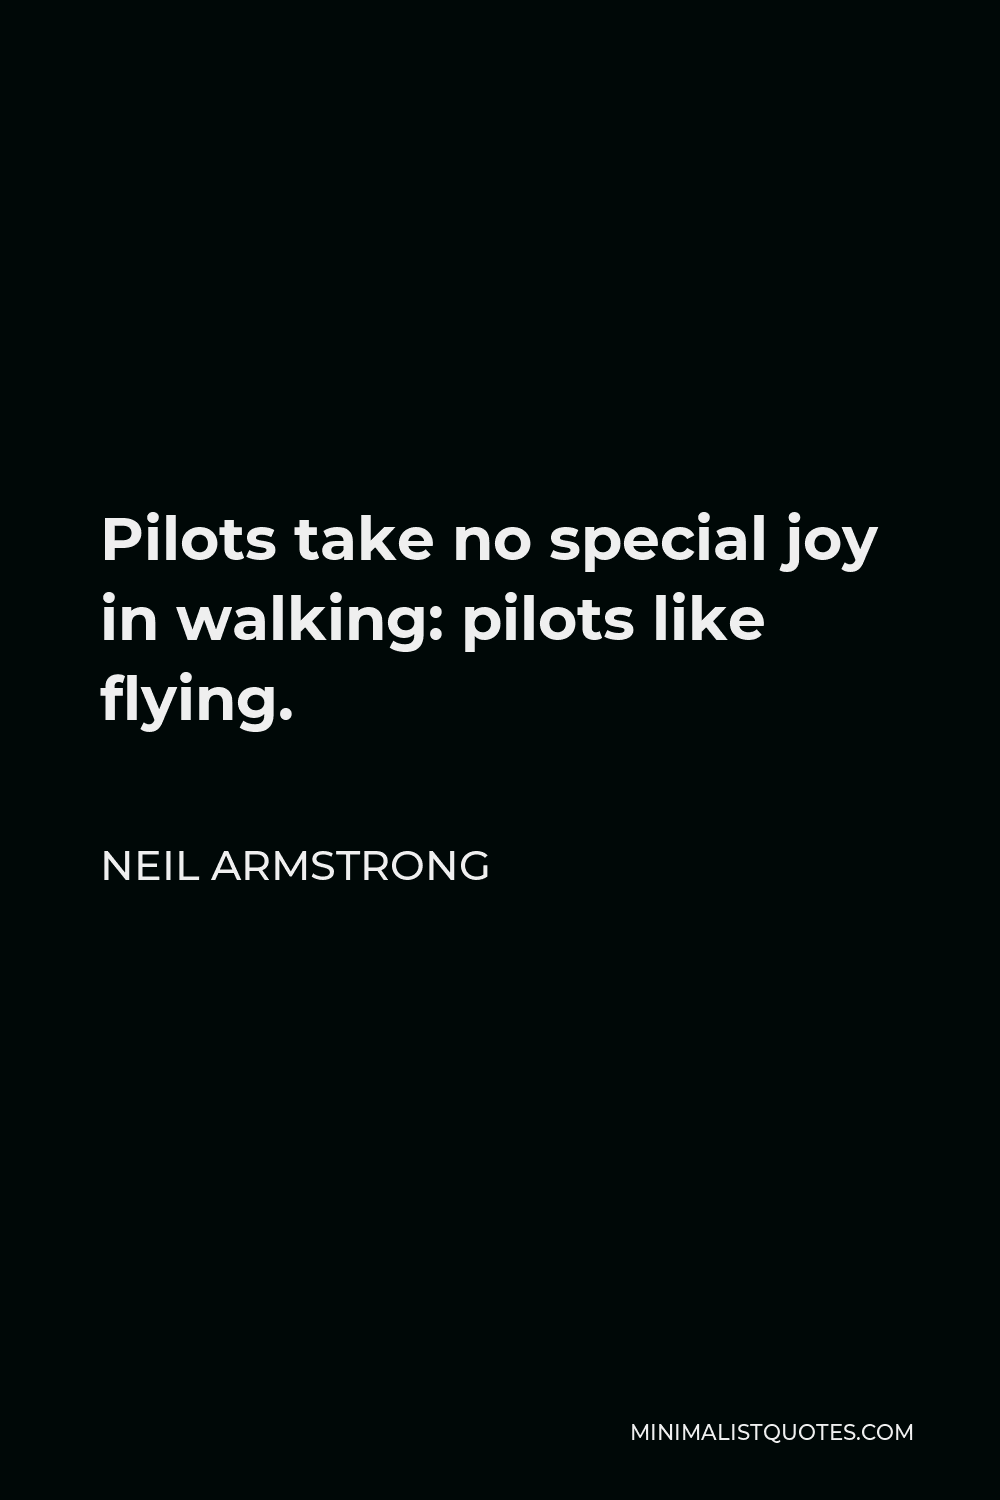 Neil Armstrong Quote - Pilots take no special joy in walking: pilots like flying.